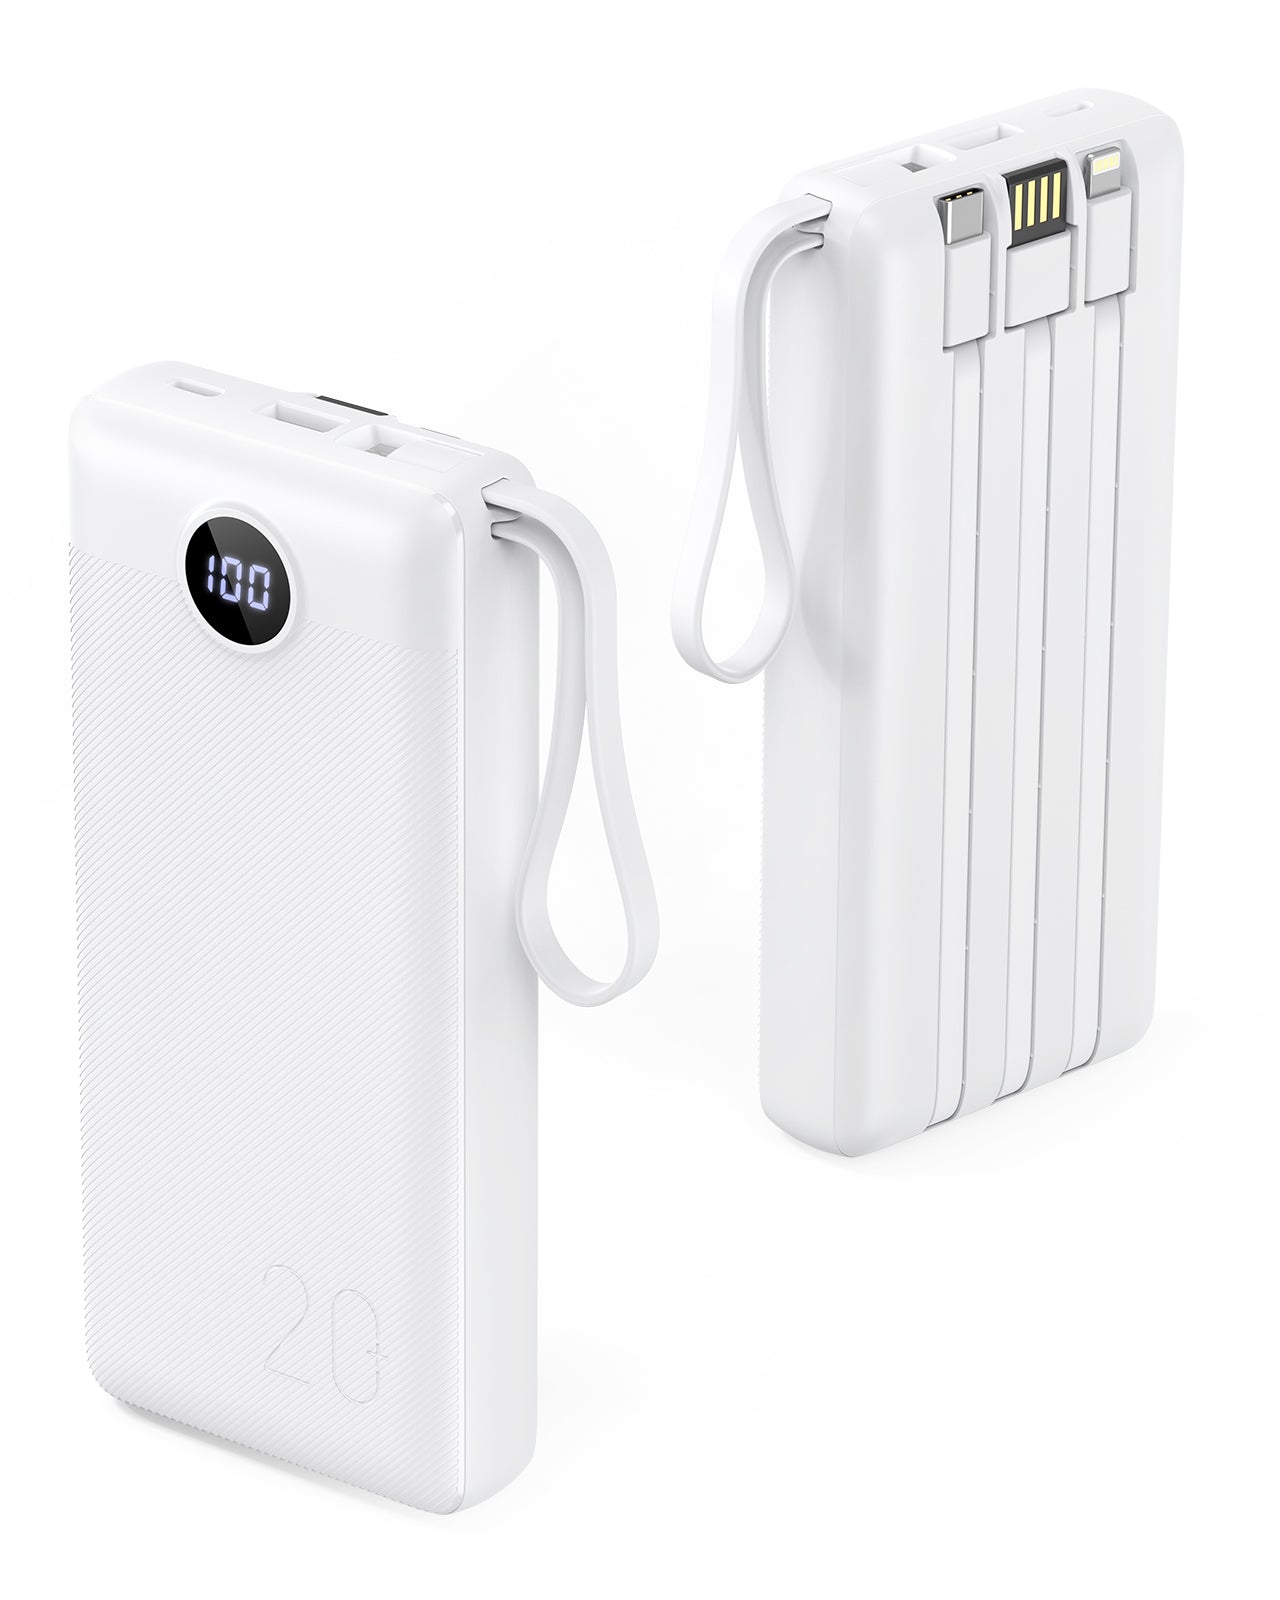 Built in Cords 22.5W PD & QC 3.0 Power Bank